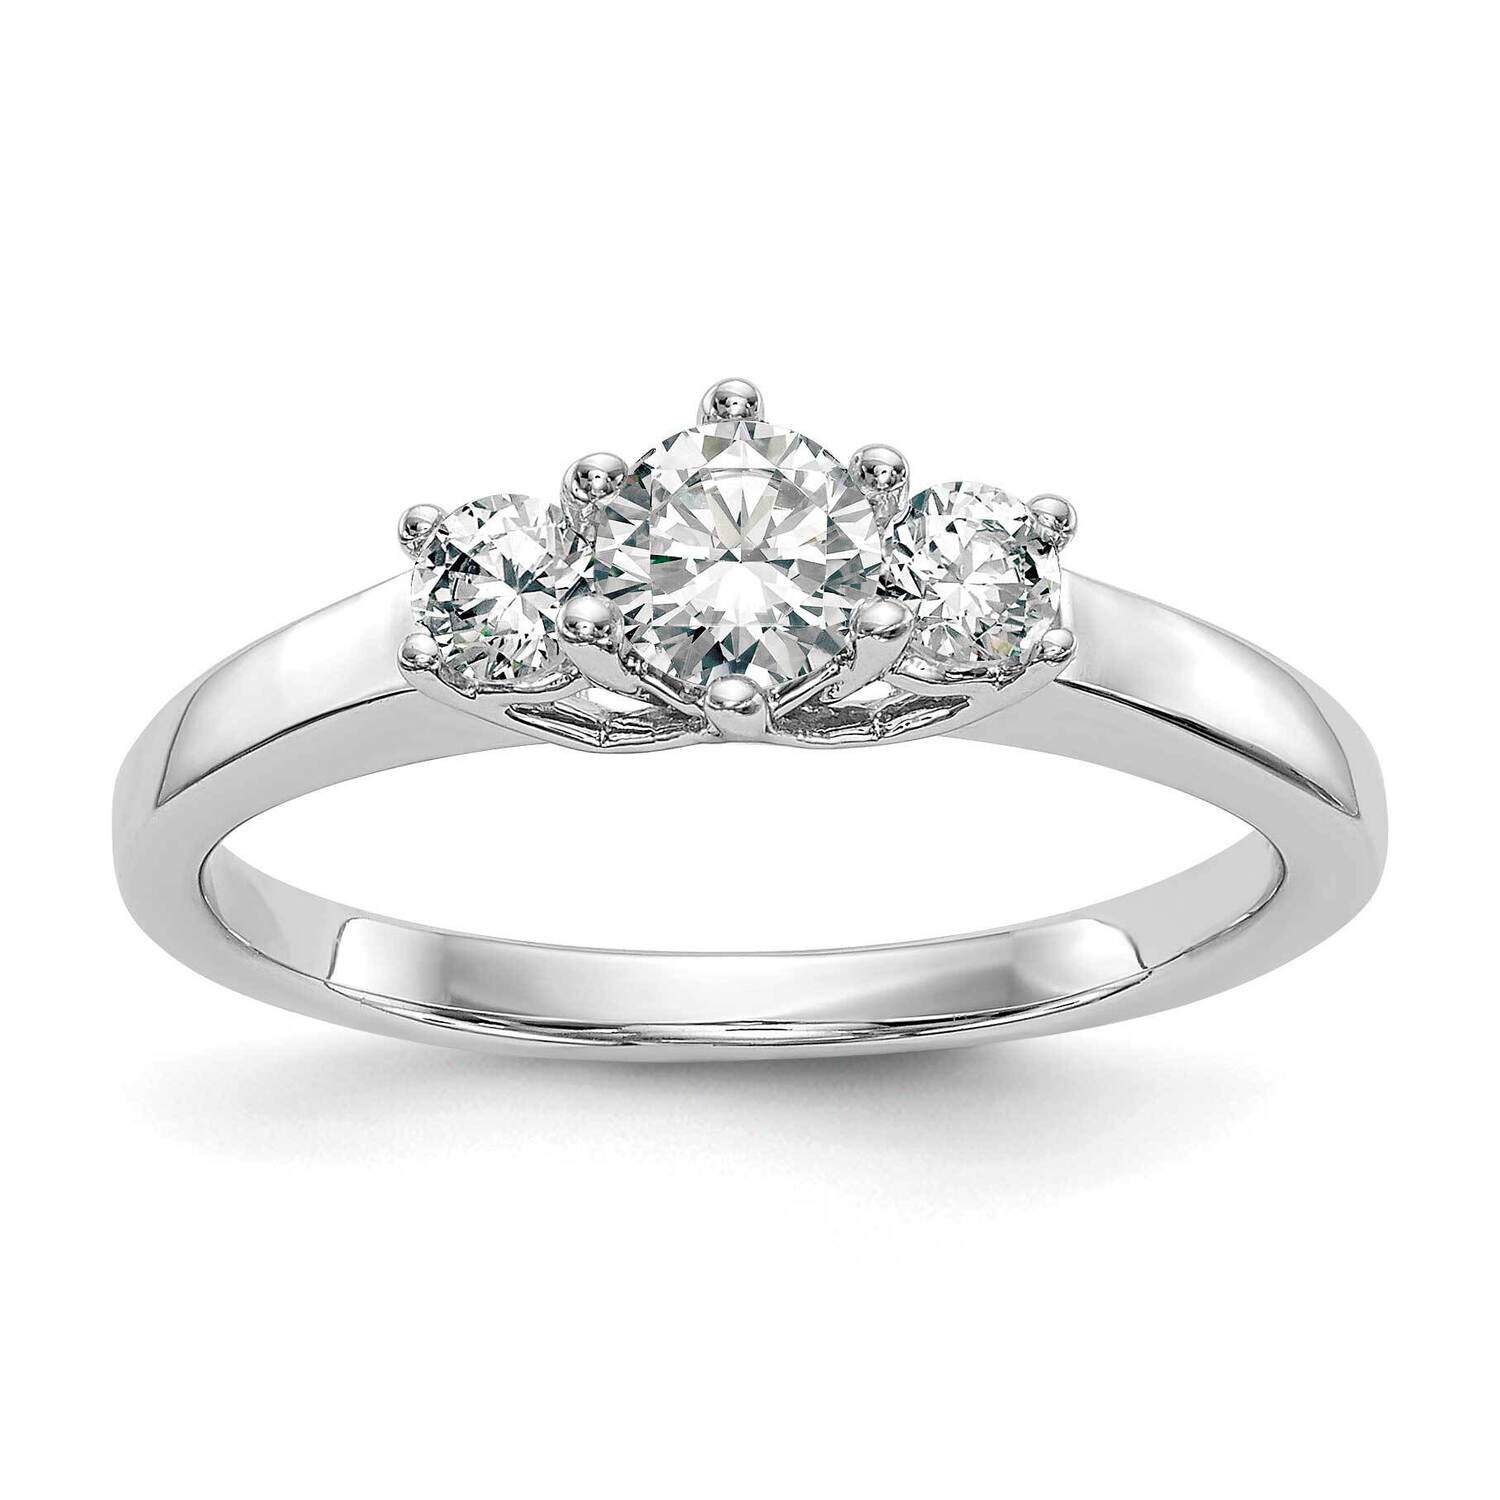 3-Stone Holds 3/8 Carat 4.6mm Round Center 2-3.1mm Round Sides Engagement Ring Mounting 14k White Gold RM2949E-038_020-CWAA